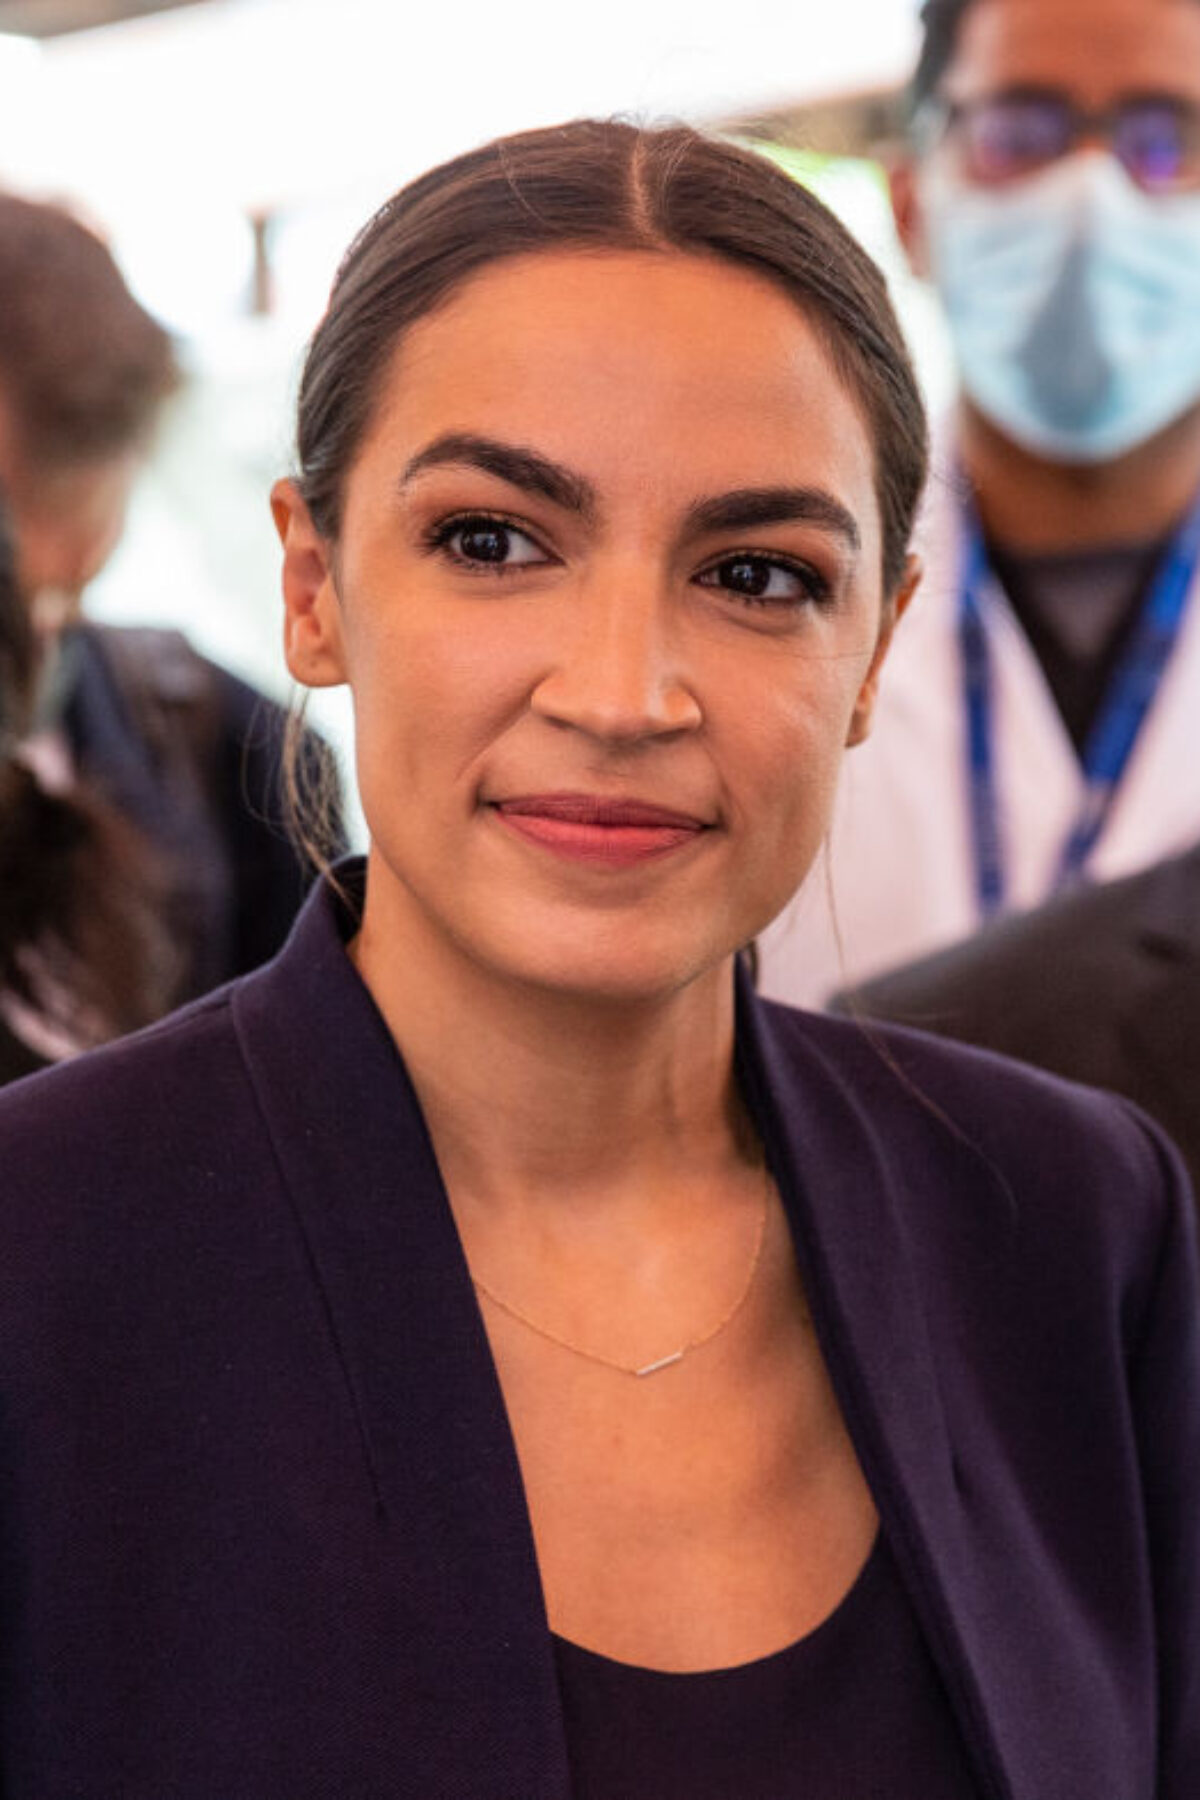 NEW YORK, UNITED STATES - 2021/06/04: Representative Alexandria Ocasio-Cortez (AOC) and other elected officials meet with employees at Elmhurst hospital. Representatives Ocasio-Cortez and Meng recently submitted a joint community funding request for $3,000,000 for fiscal year of 2022 to House Appropriators to be available to upgrade maternity facility at Elmhurst. U. S. Senator Gillibrand recently announced the Modernizing Obstetric Medicine Standards (MOMS) Act and Maternal CARE Act to help address the disproportionate rate of maternal deaths among Black and brown women. (Photo by Lev Radin/Pacific Press/LightRocket via Getty Images)